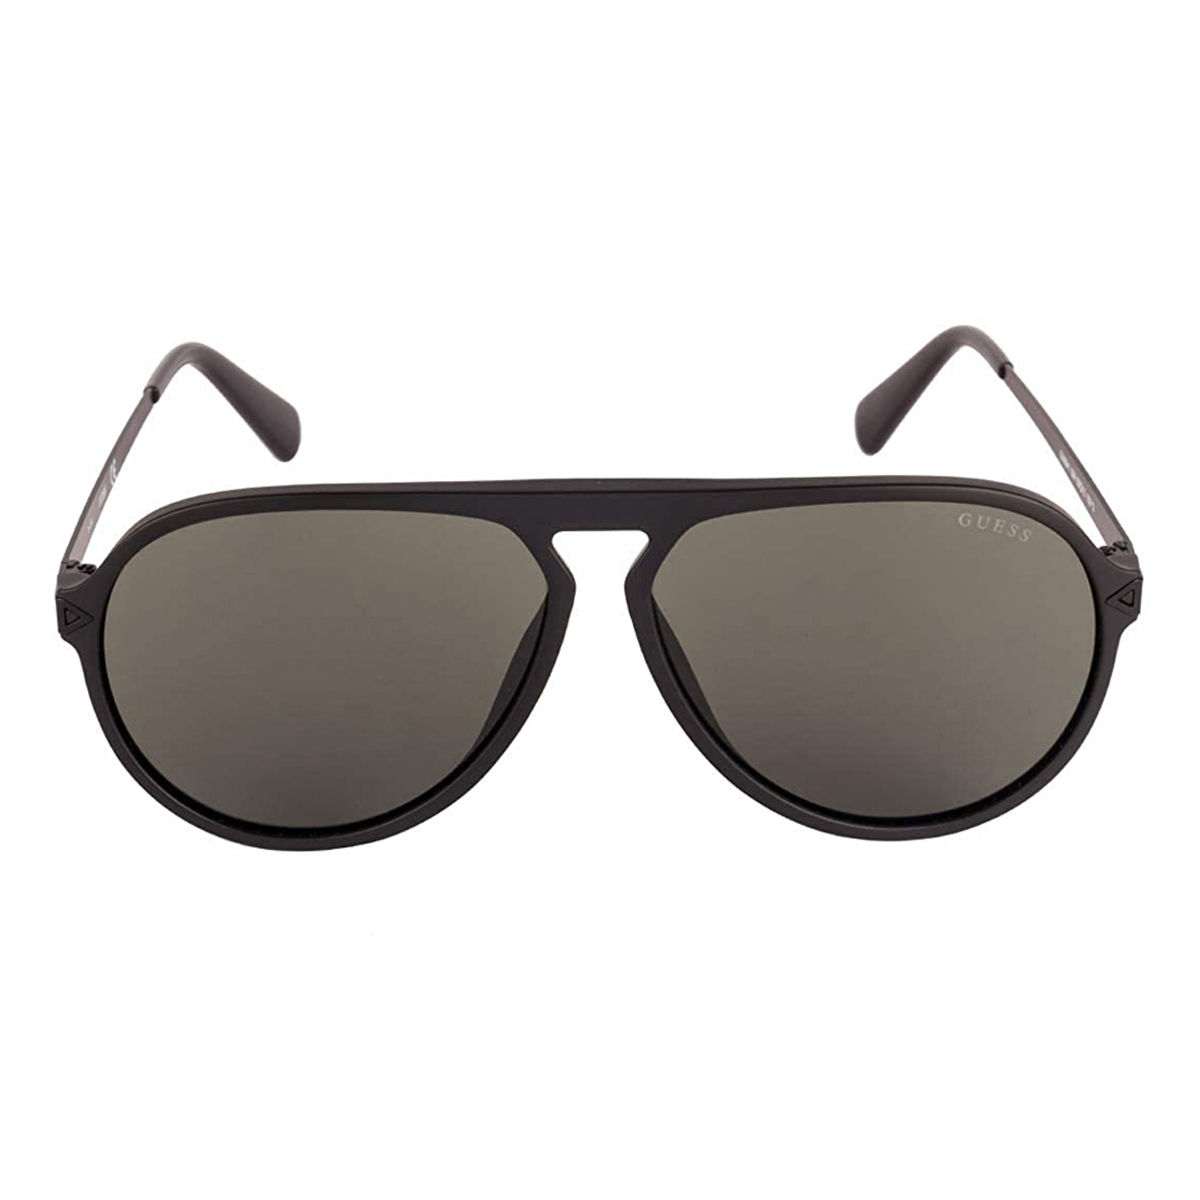 Guess Sunglasses Aviator With Green Lens For Men